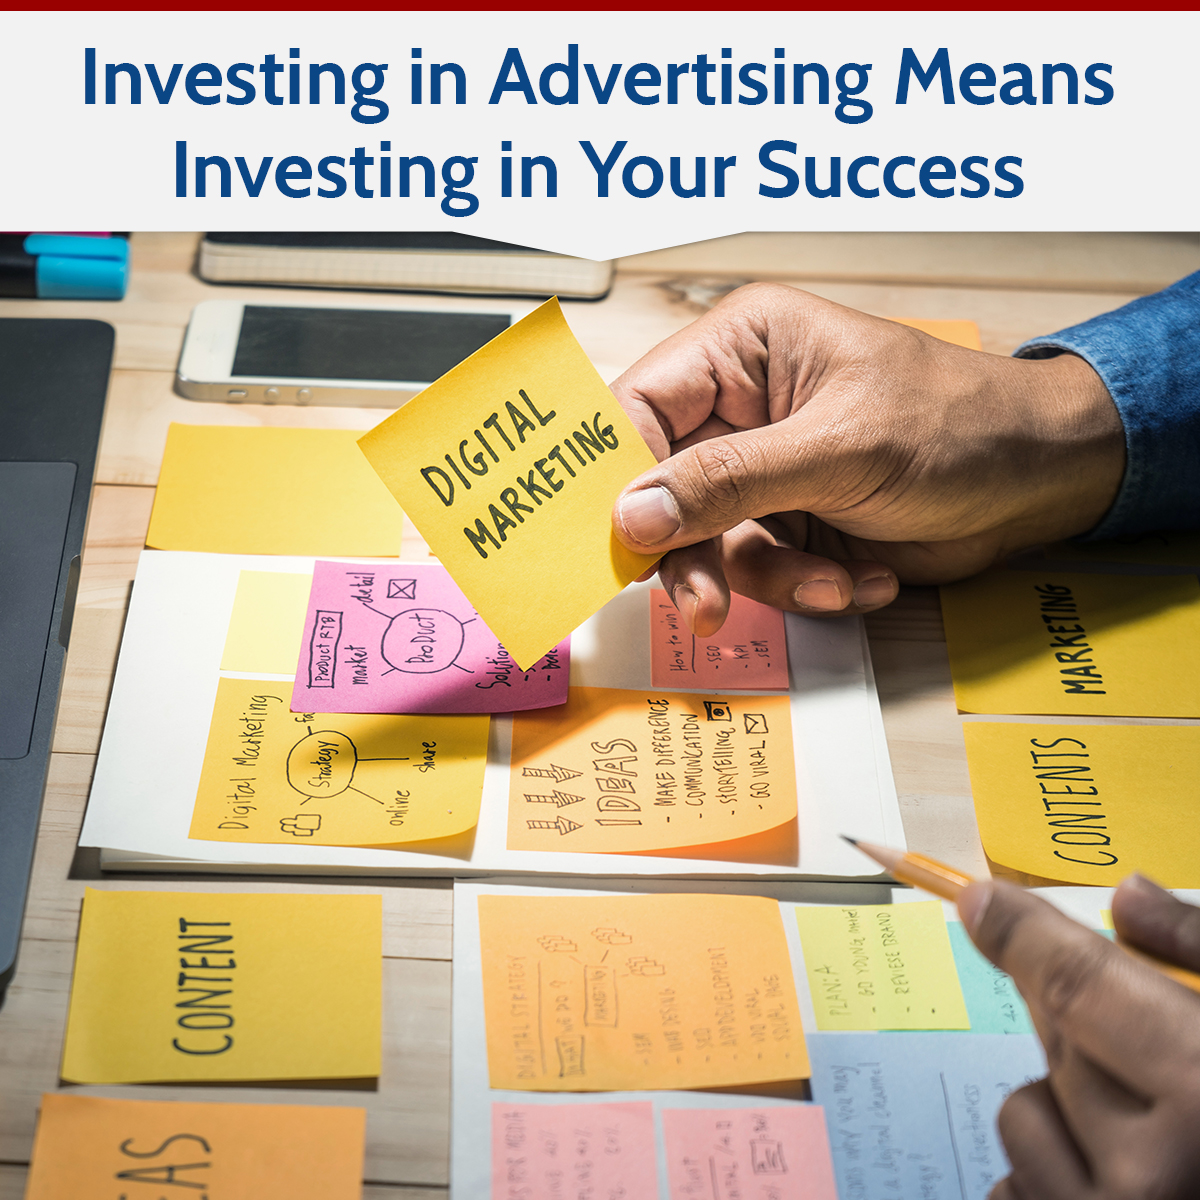 Investing in Advertising Means Investing in Your Success